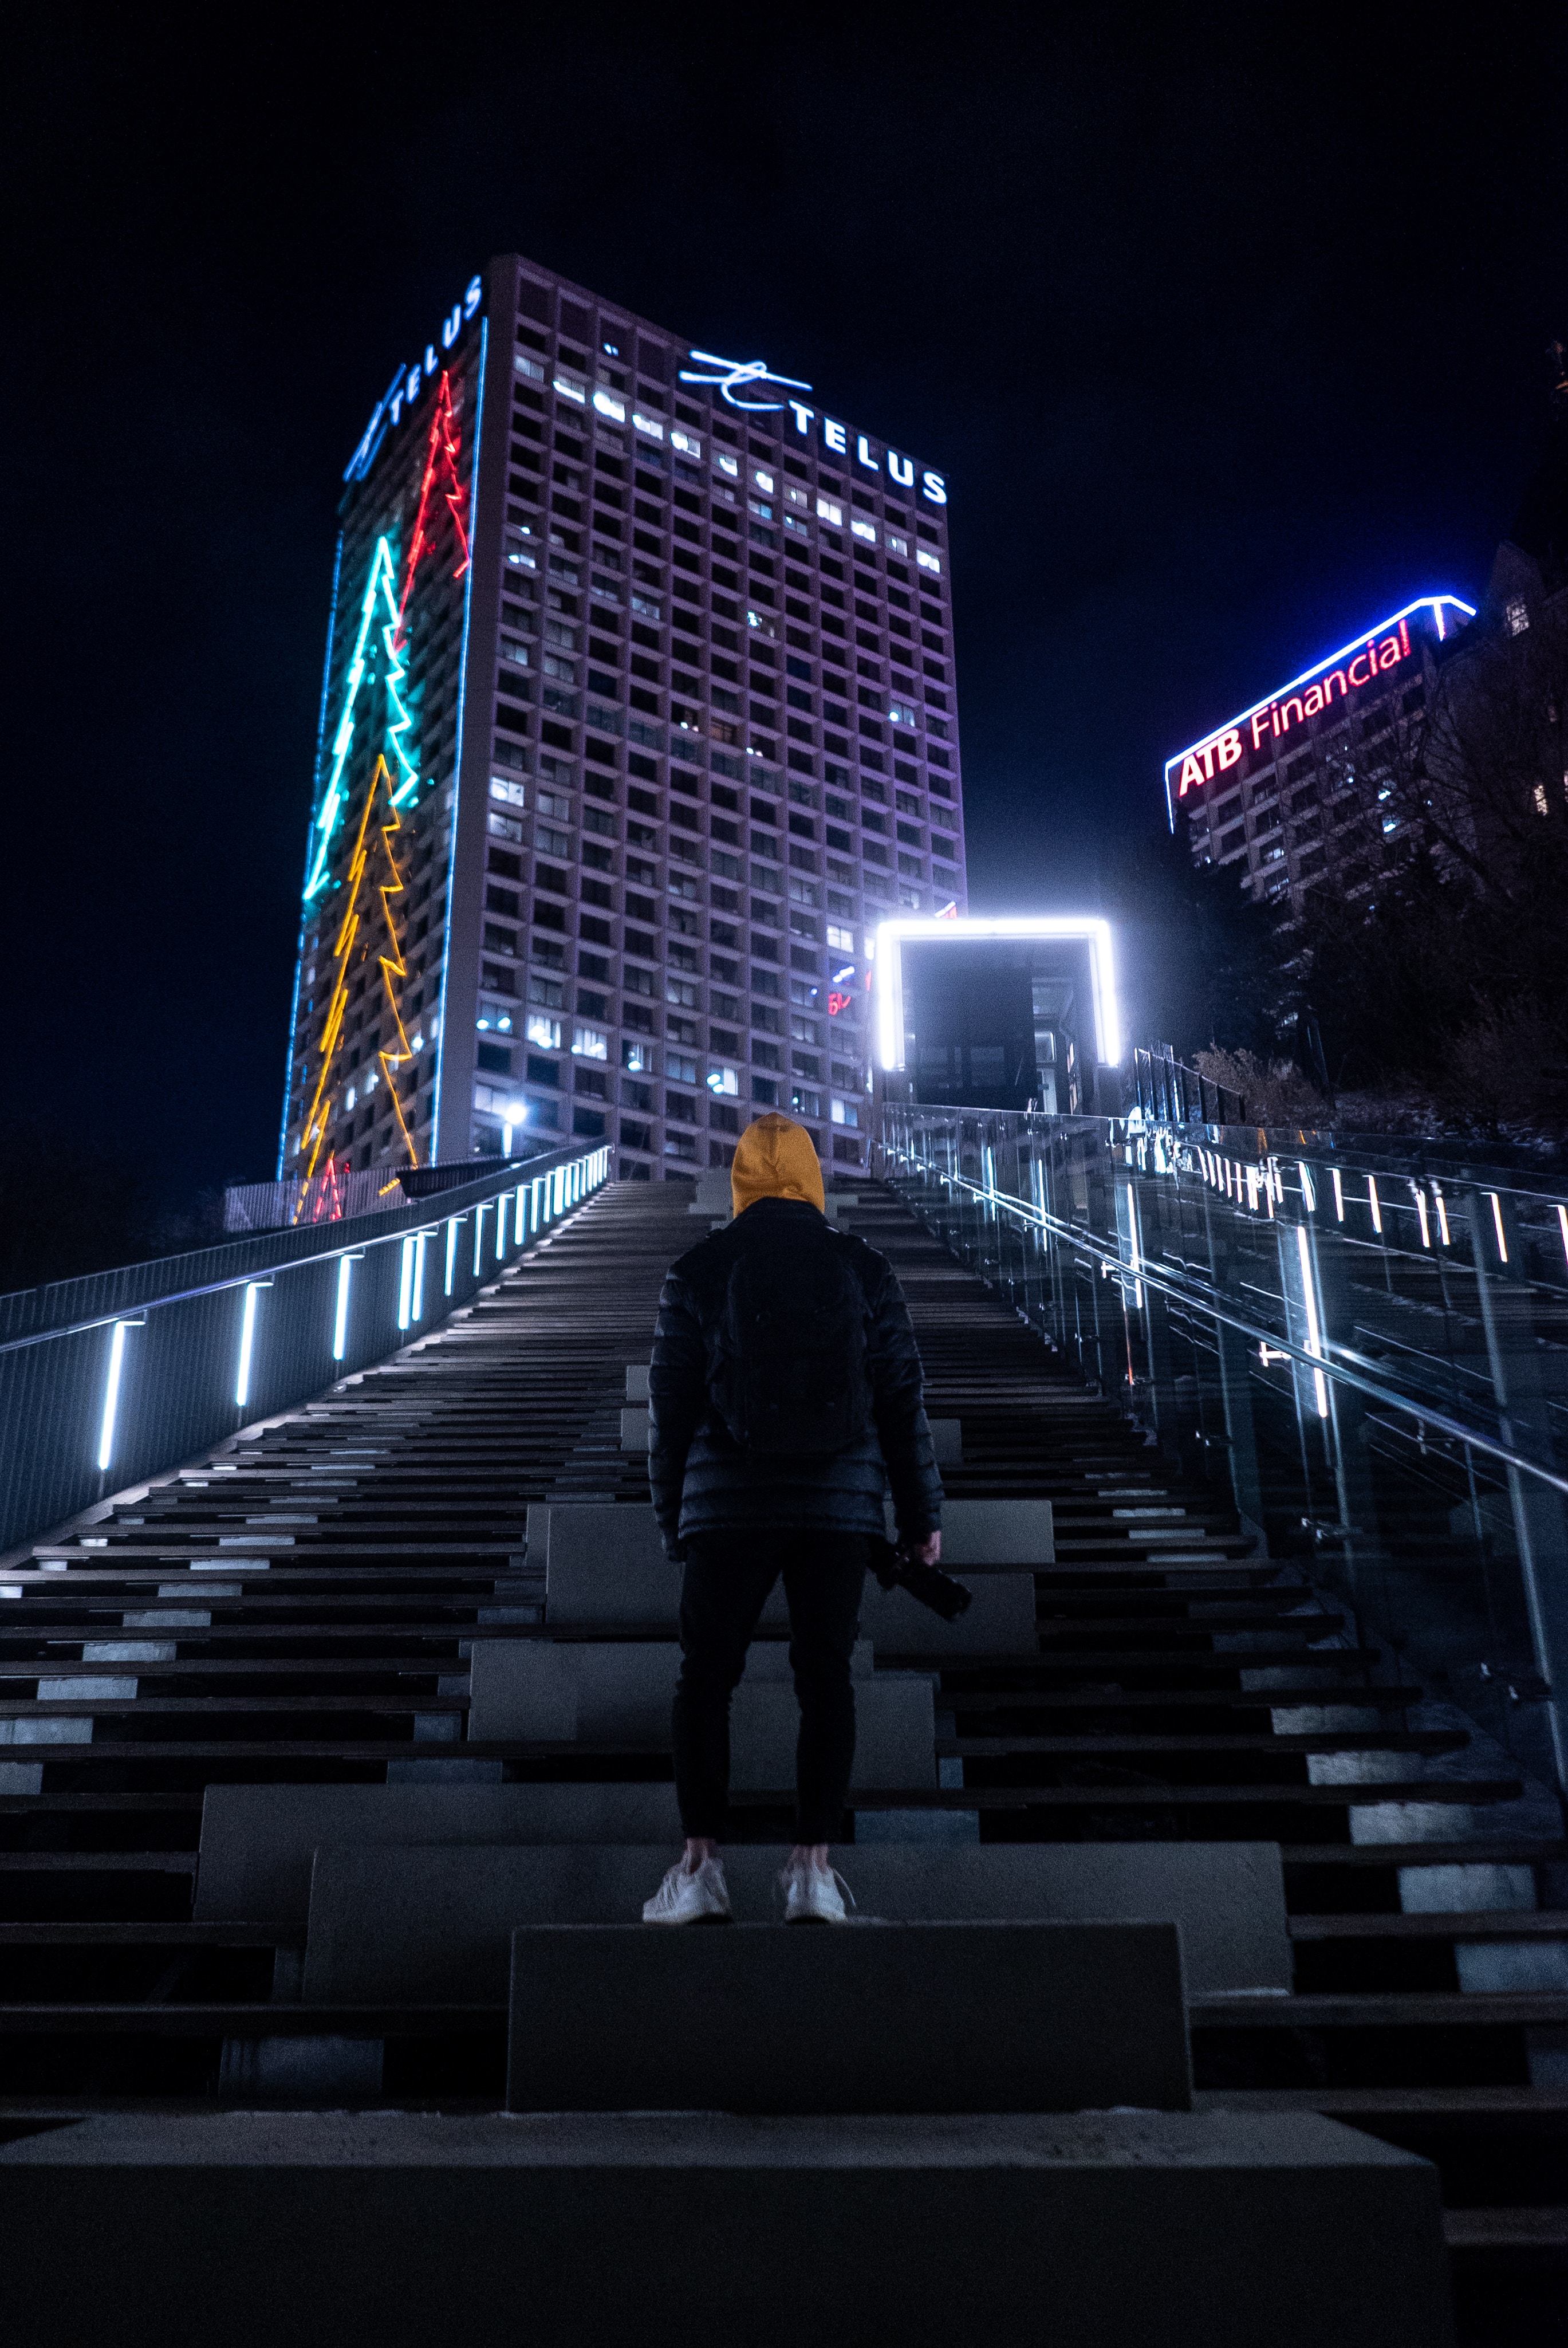 alone, dark, lonely, building, night city, human, person, hood 32K